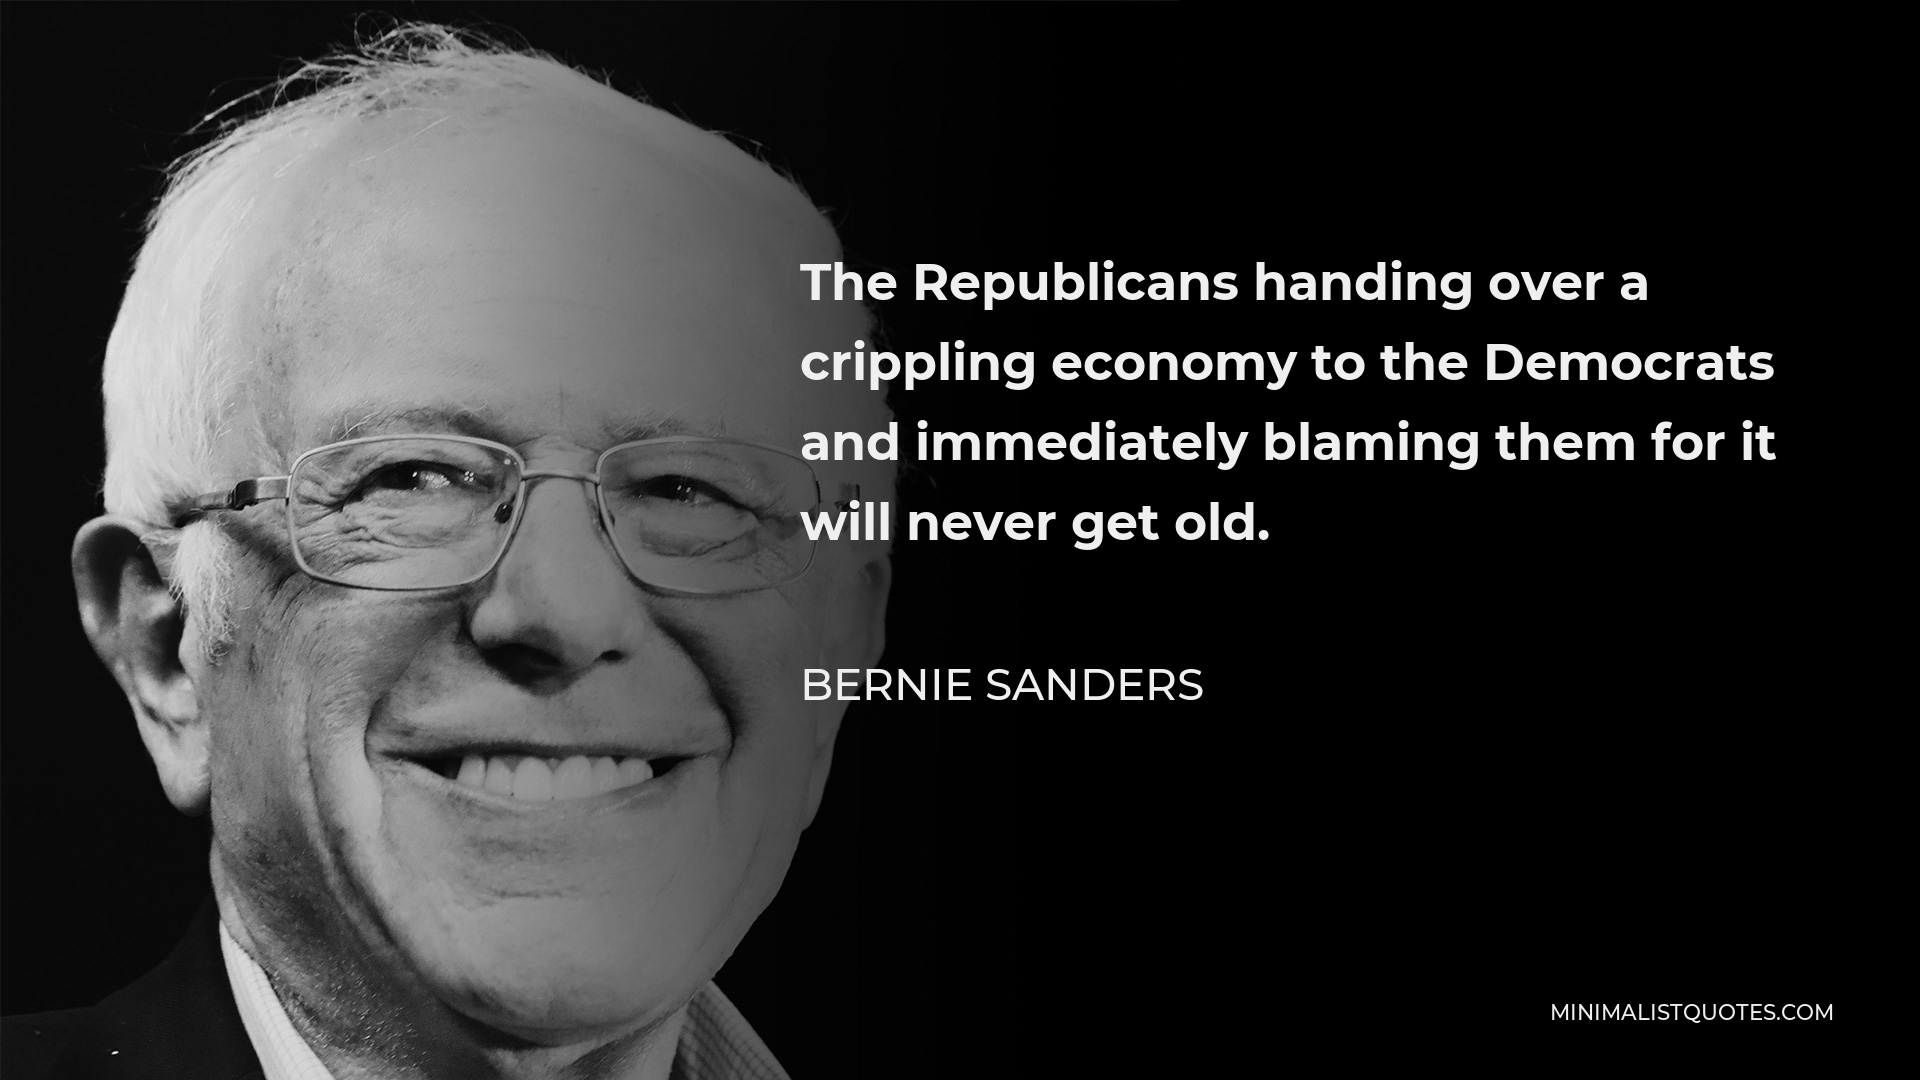 Bernie Sanders Quote - The Republicans handing over a crippling economy to the Democrats and immediately blaming them for it will never get old.